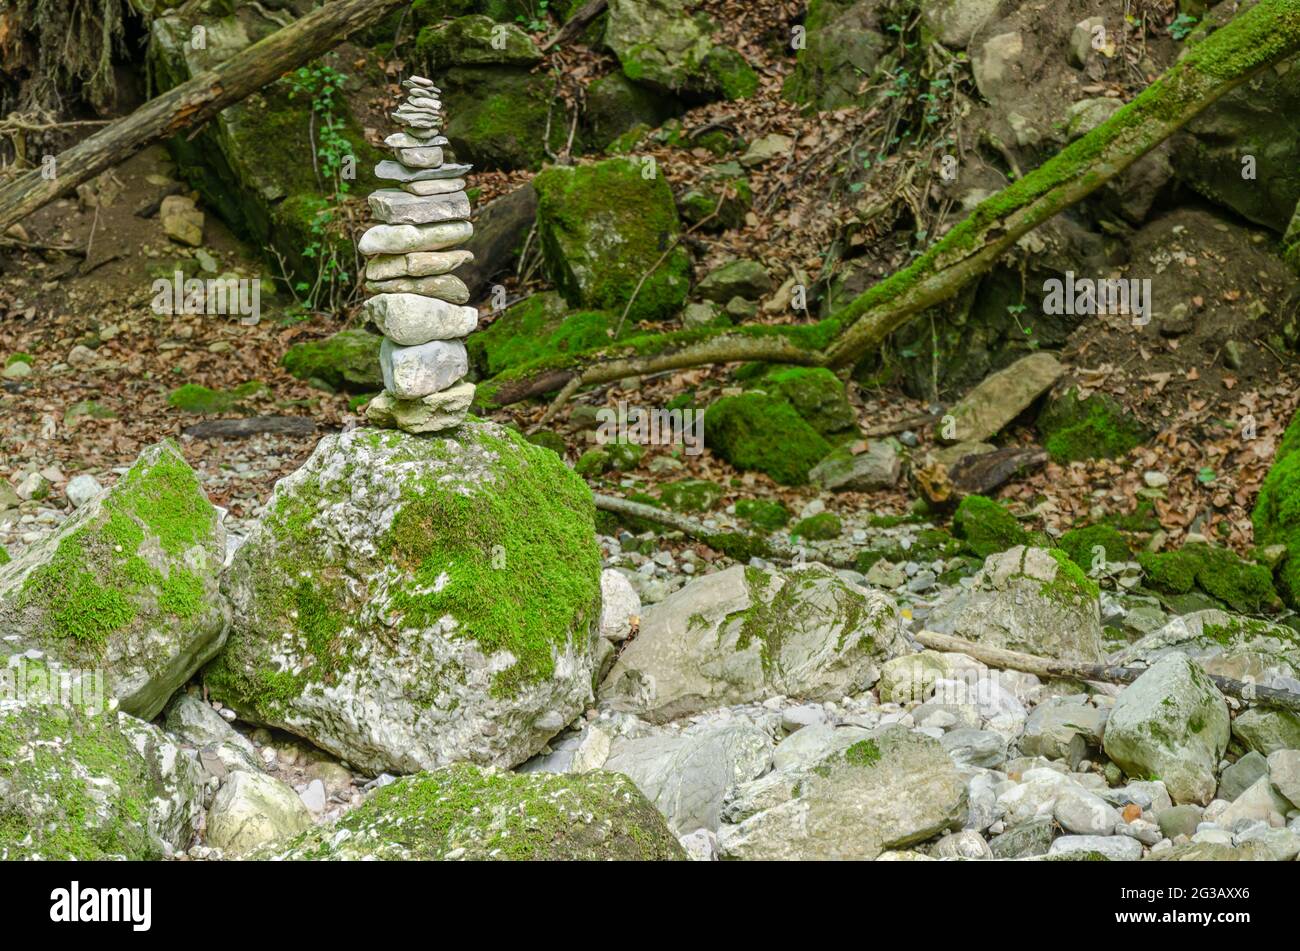 Single rock stack in a streambed. Pile of stacked rocks balancing on a big rock in a bed of a wild stream. Rocks laid flat upon each other. Stock Photo